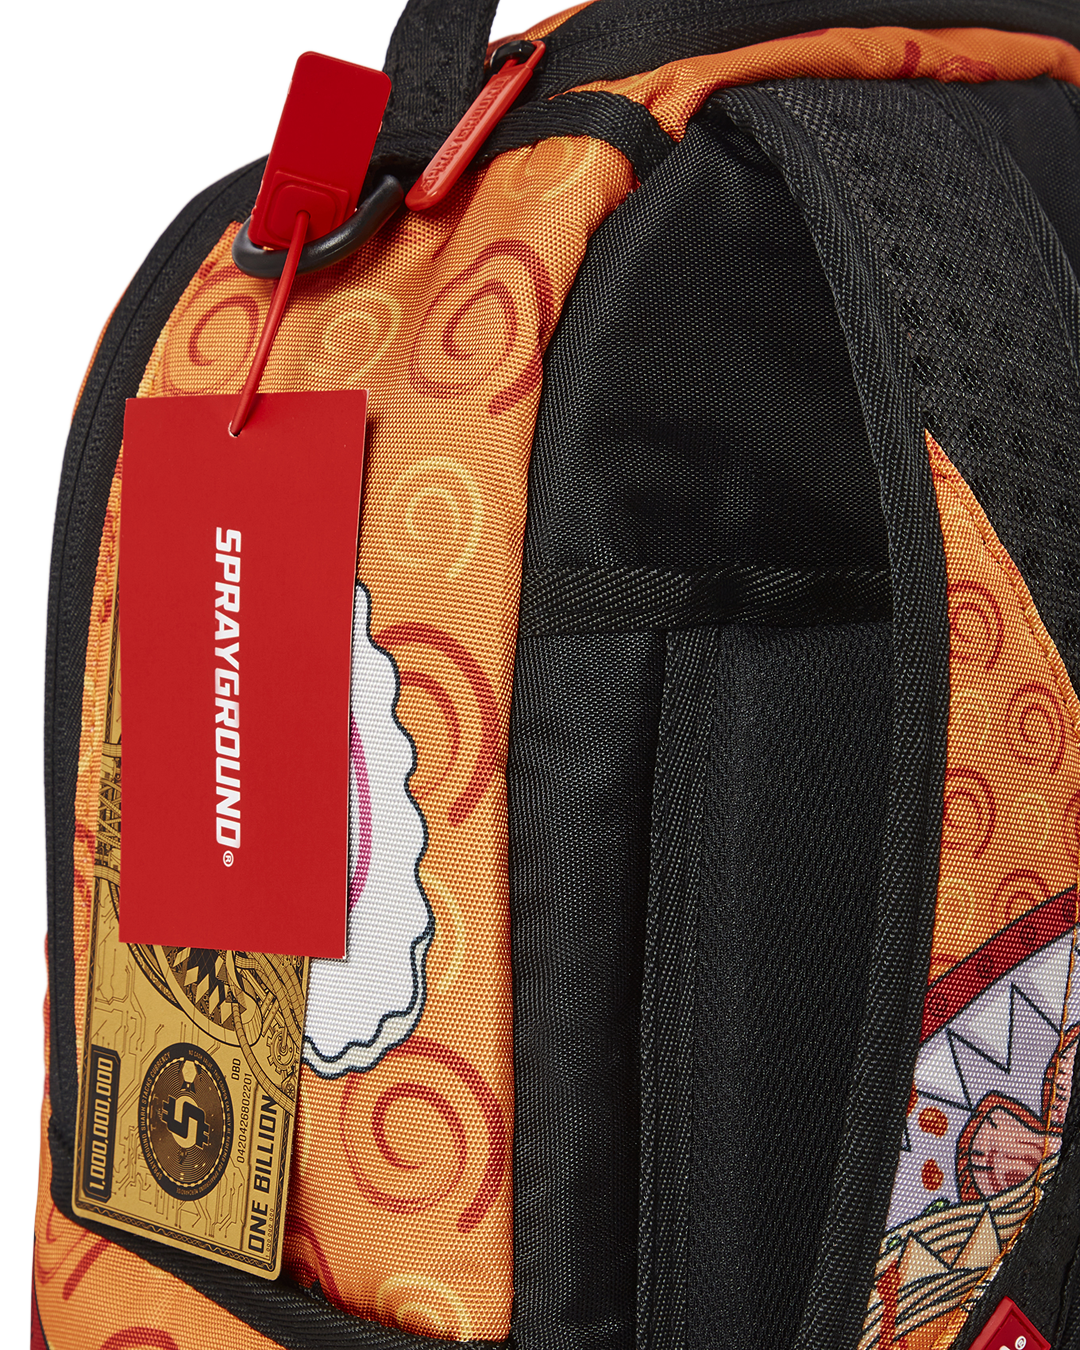  Naruto Weapons ECO 2.0 Backpack, Black, Taille Unique